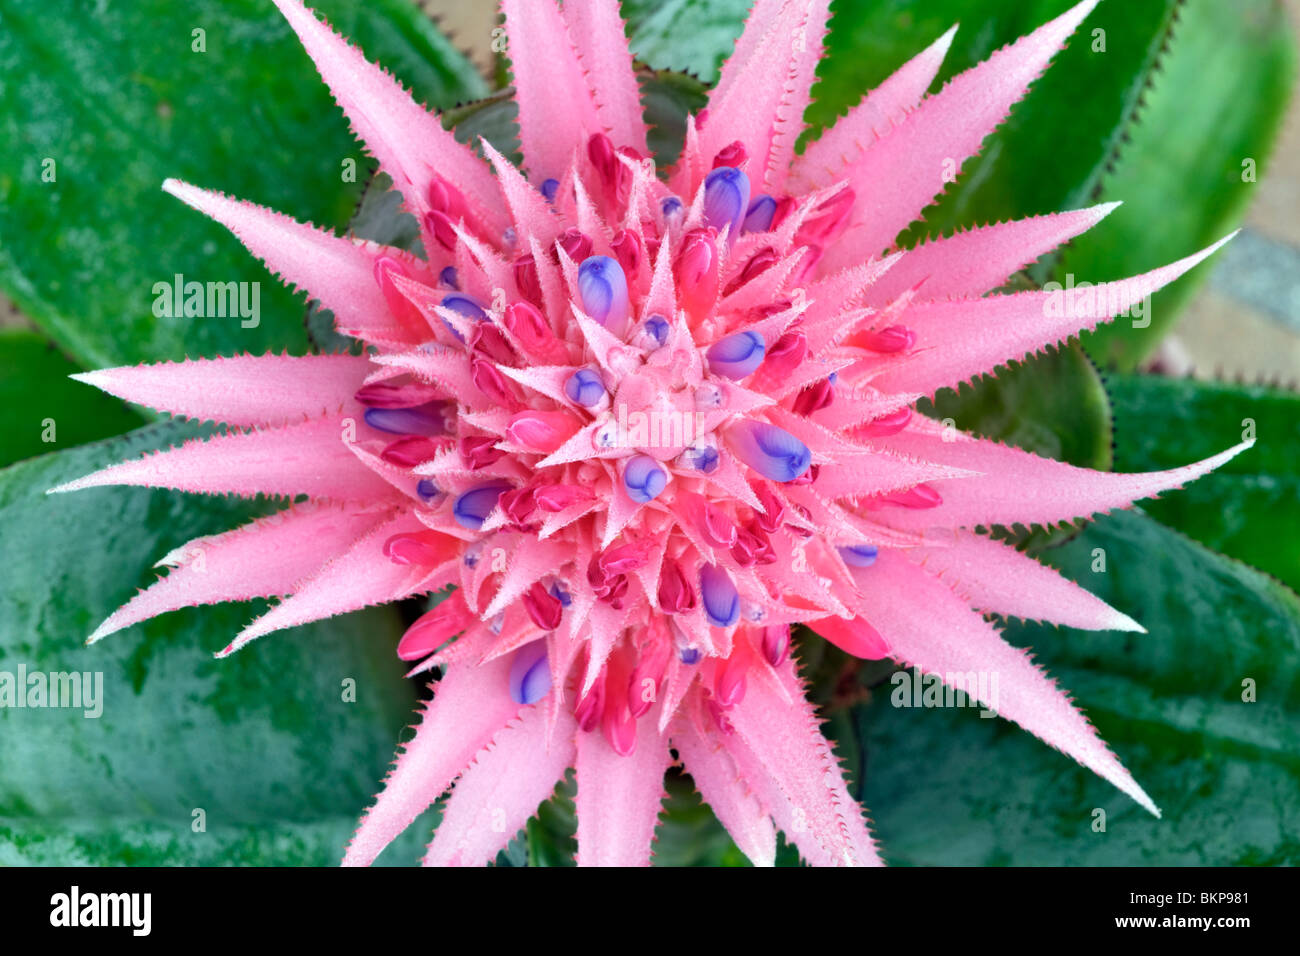 Close-up of a Bromeliad flower. Stock Photo